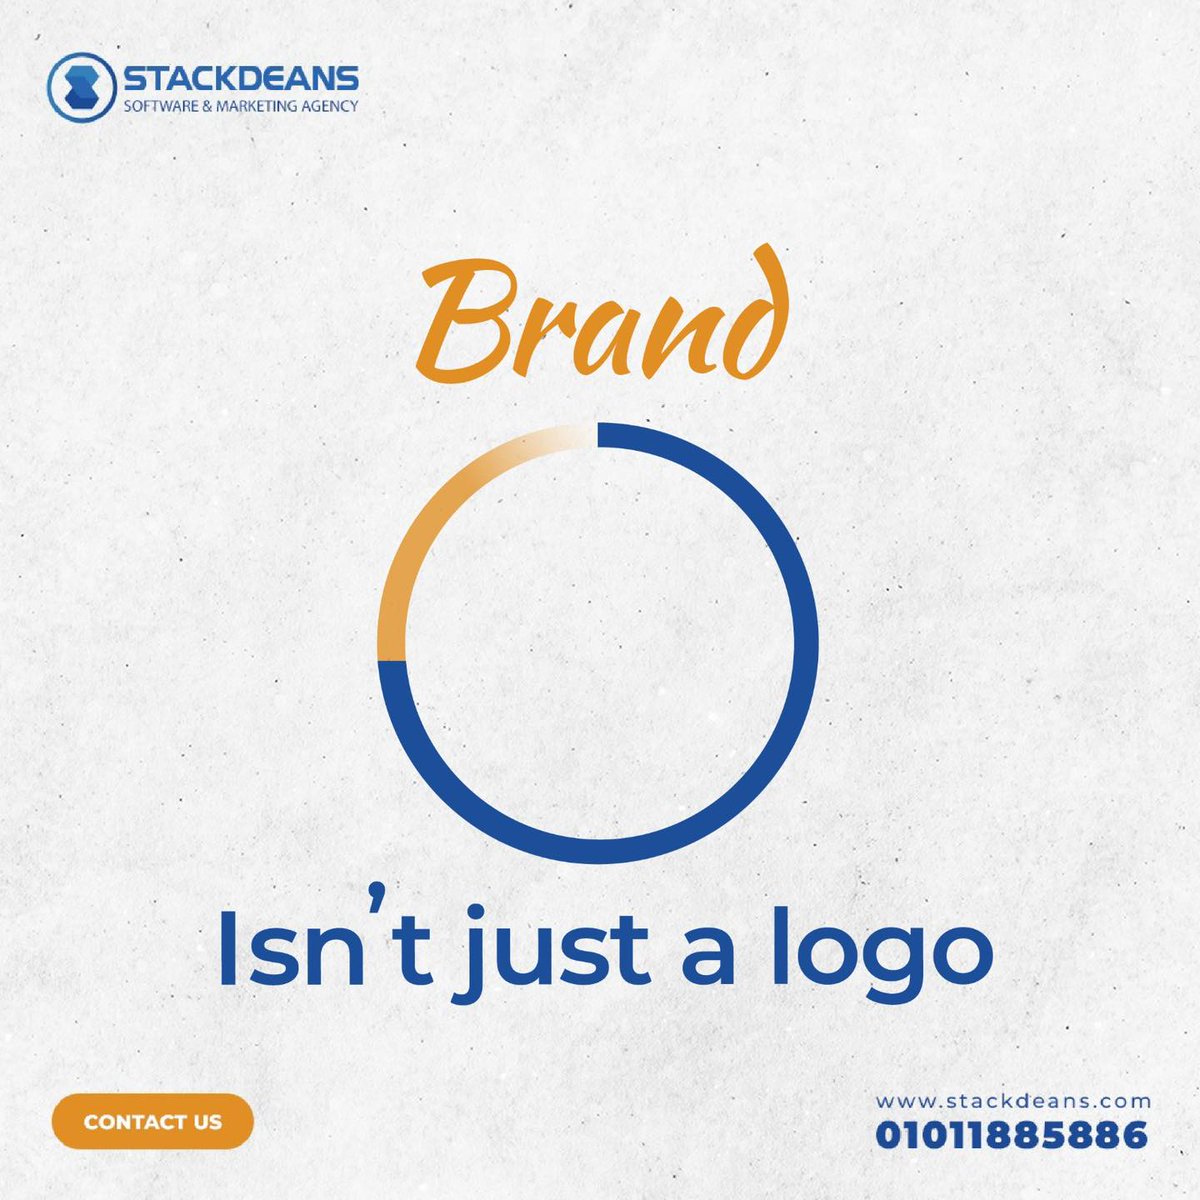 🔵The brand isn’t just a logo;
It’s the whole experience and the sum of every touchpoint your customer has with the provided product or service. 🔗
So it’s important that you provide a unique and consistent experience with full brand identity. 👌 
 Contact us now 📥